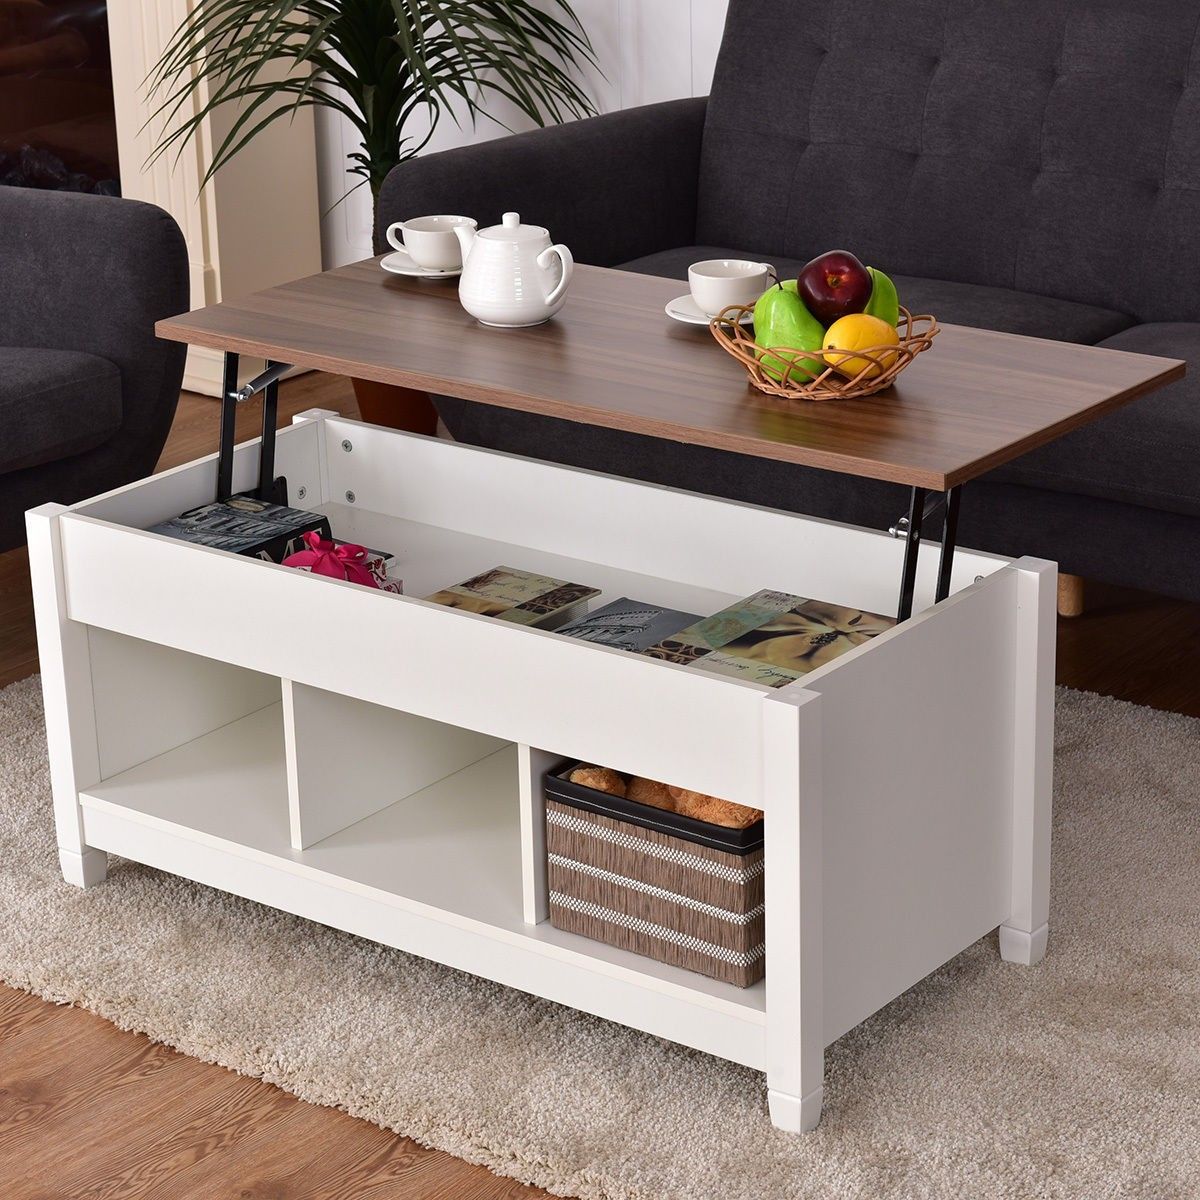 Lift Top Coffee Table With Hidden Storage Compartment Home Living Room Inside Modern Coffee Tables With Hidden Storage Compartments (Gallery 19 of 20)